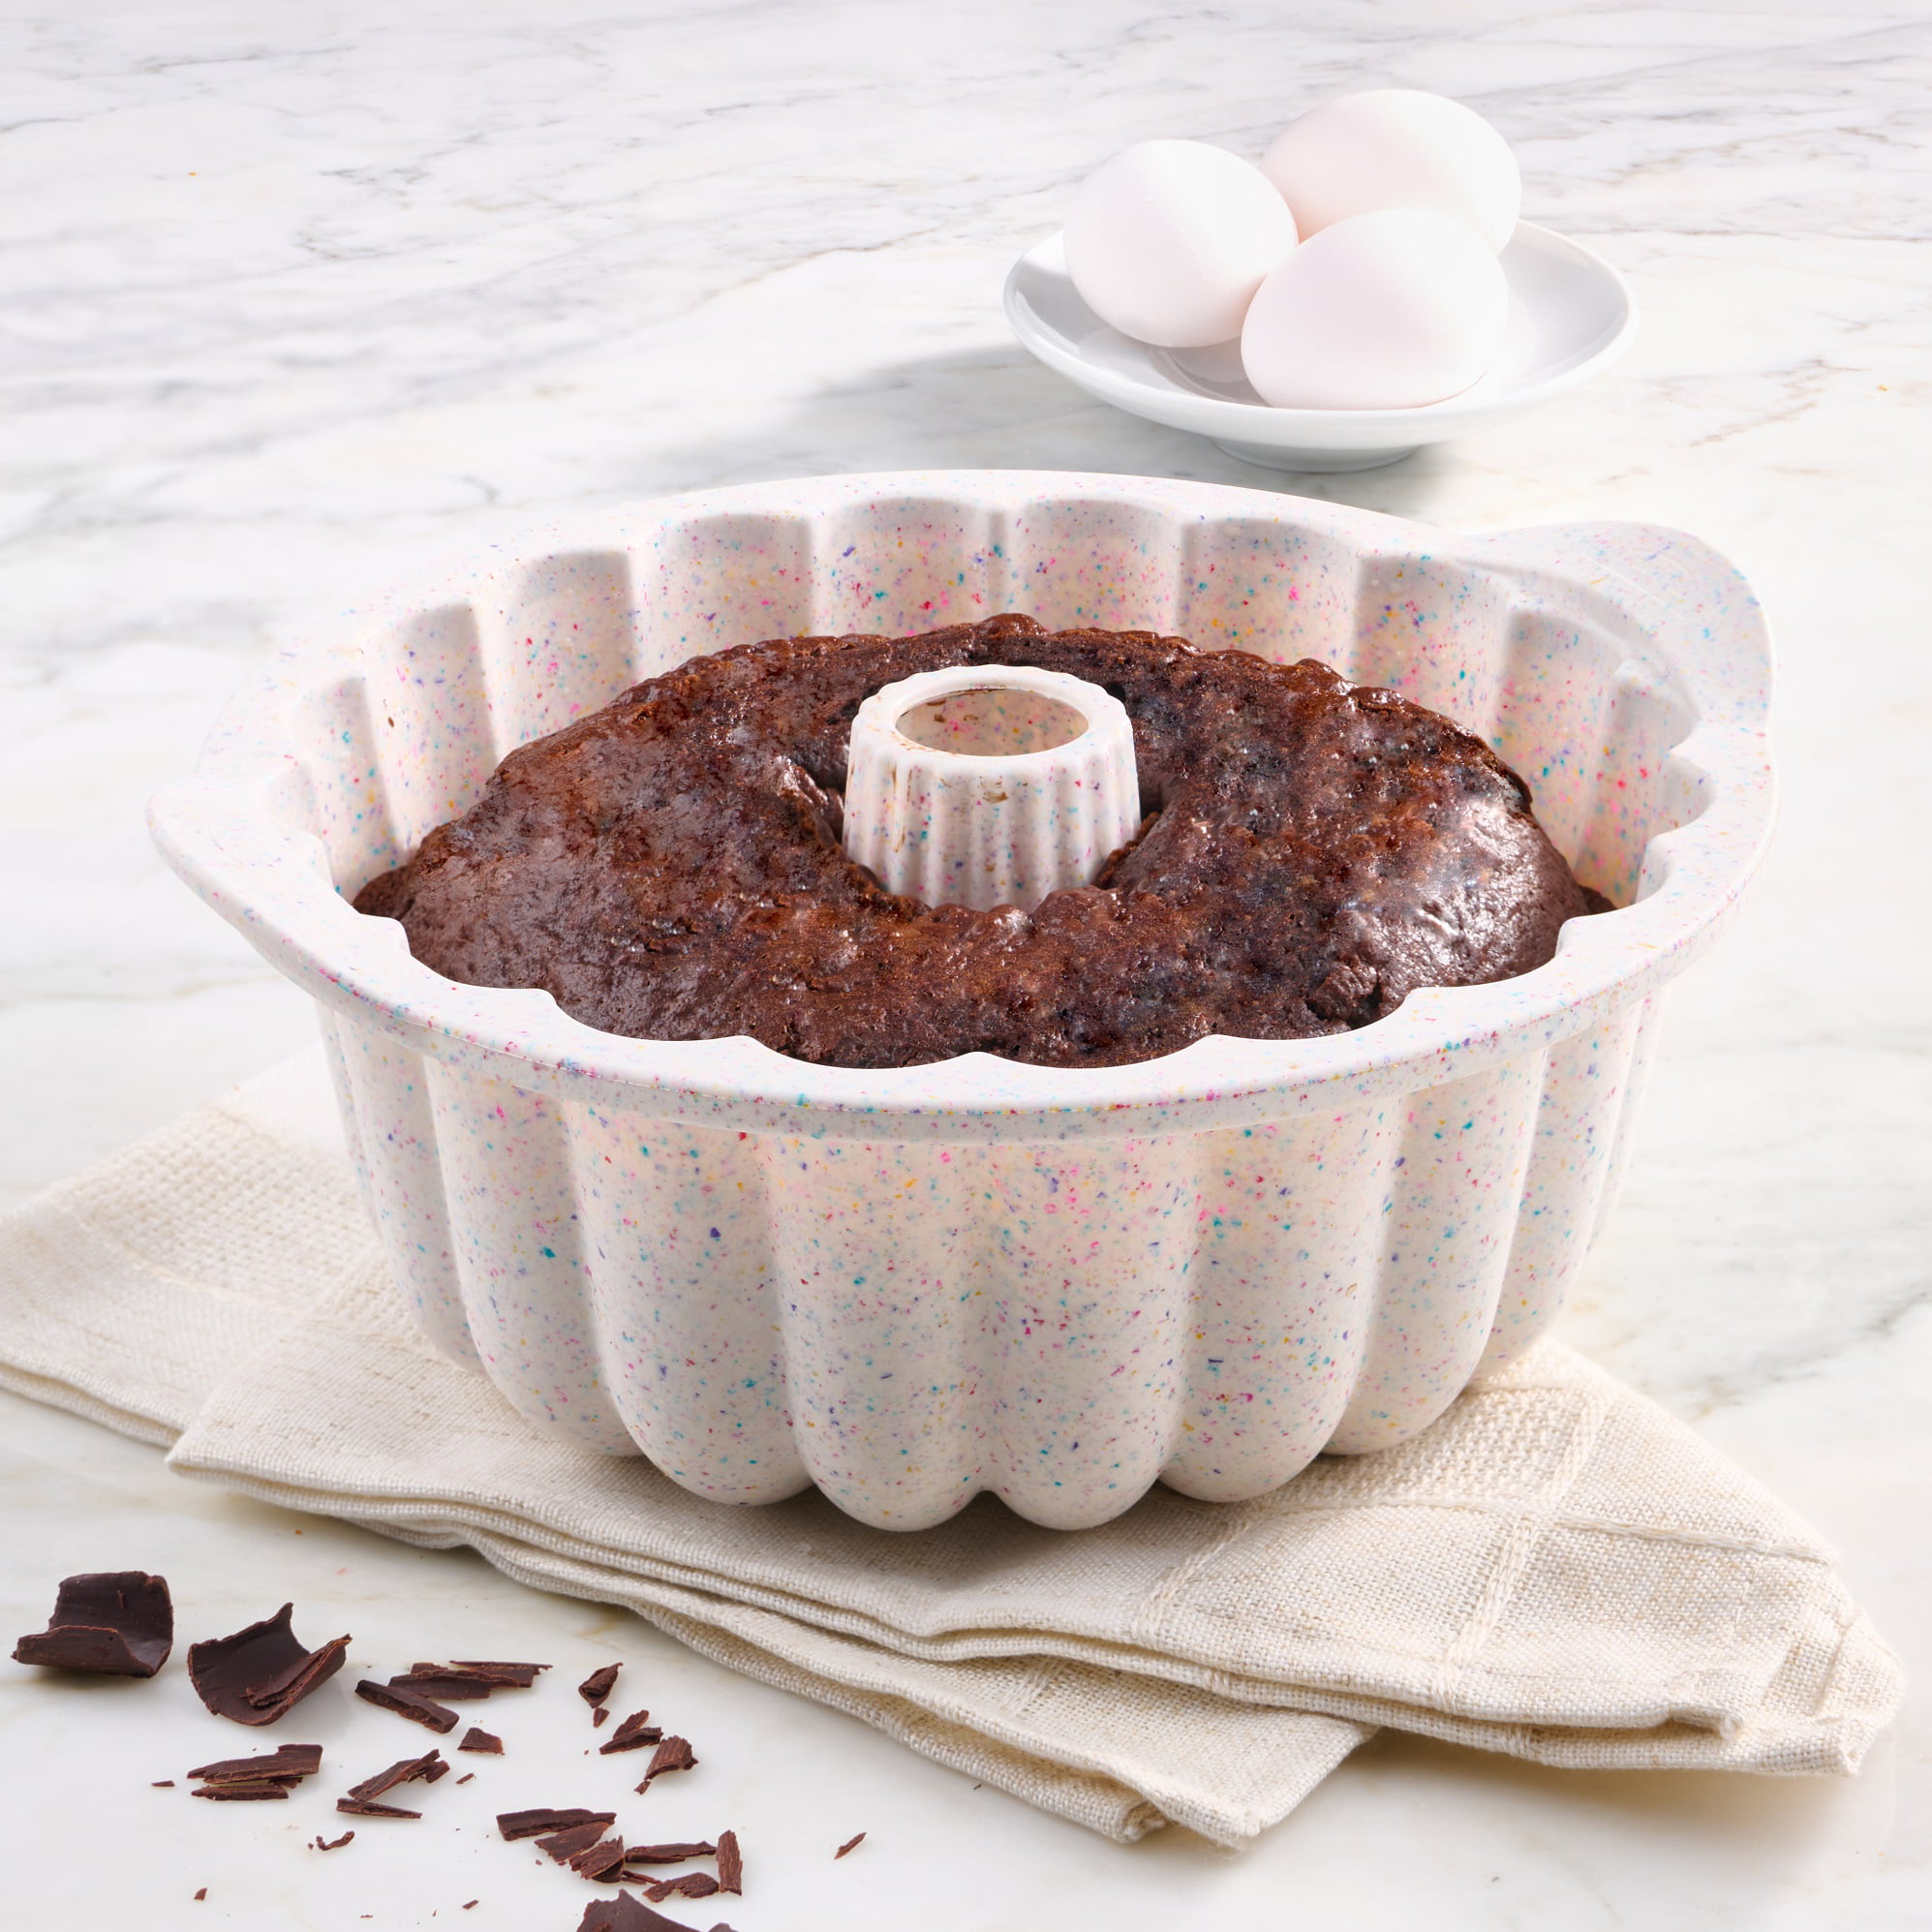 Trudeau Structured Silicone Fluted Cake Pan (or Bundt) - T63